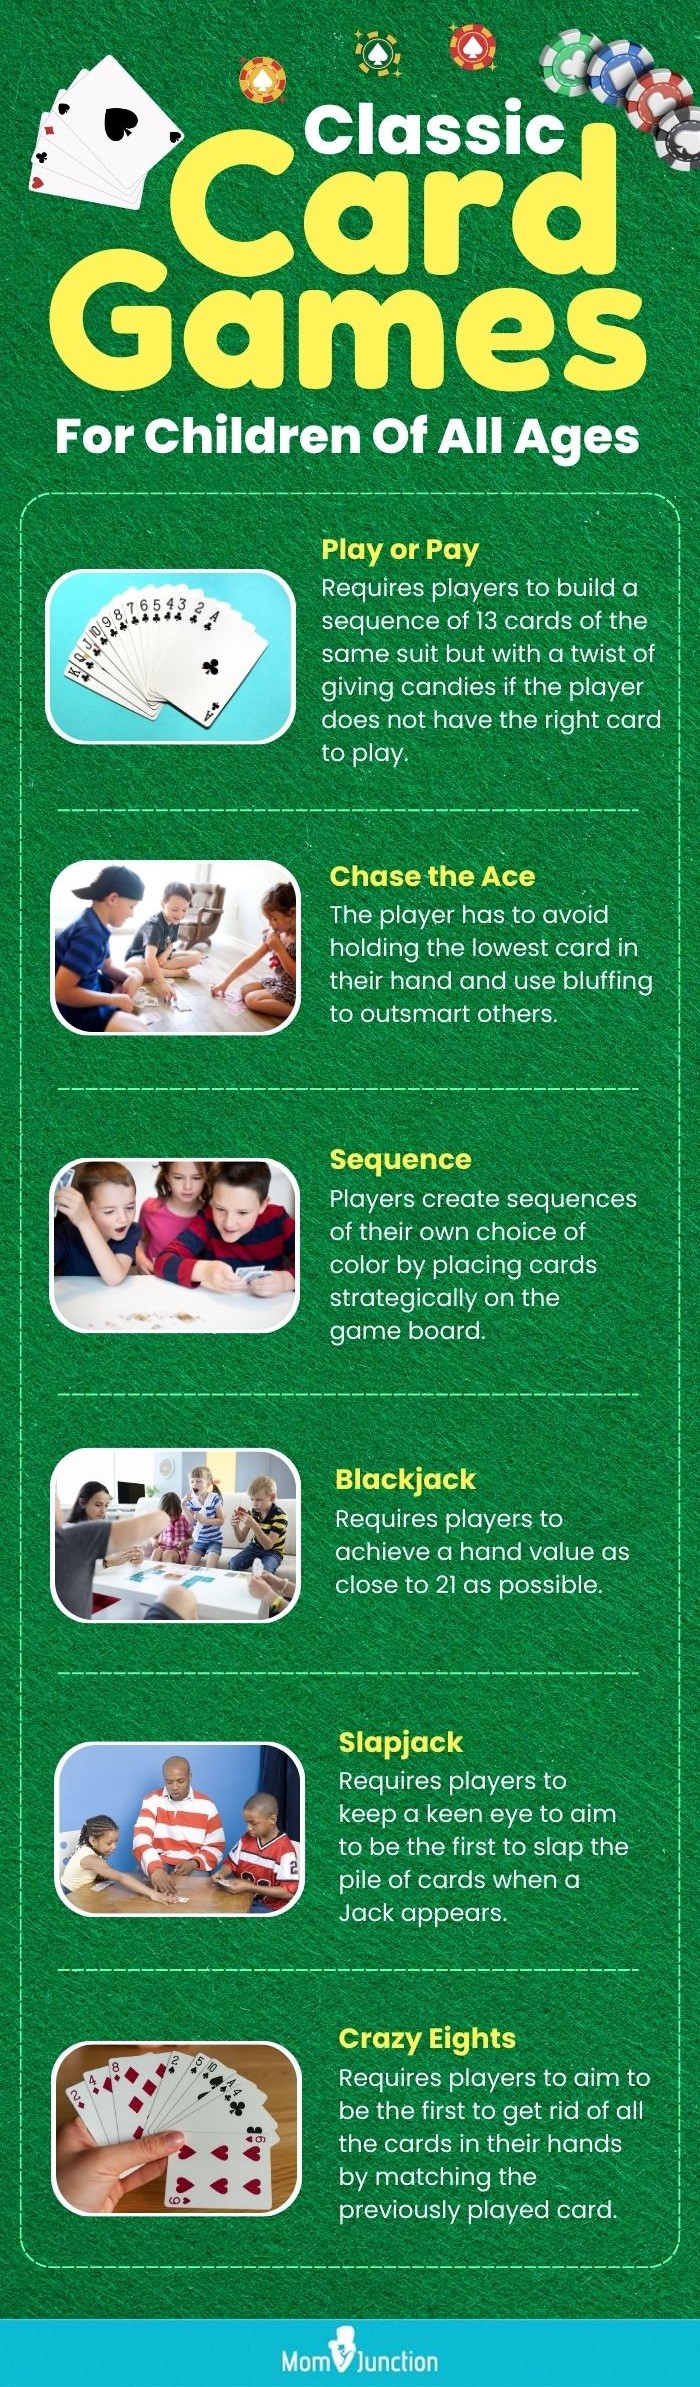 classic card games for children of all ages (infographic)